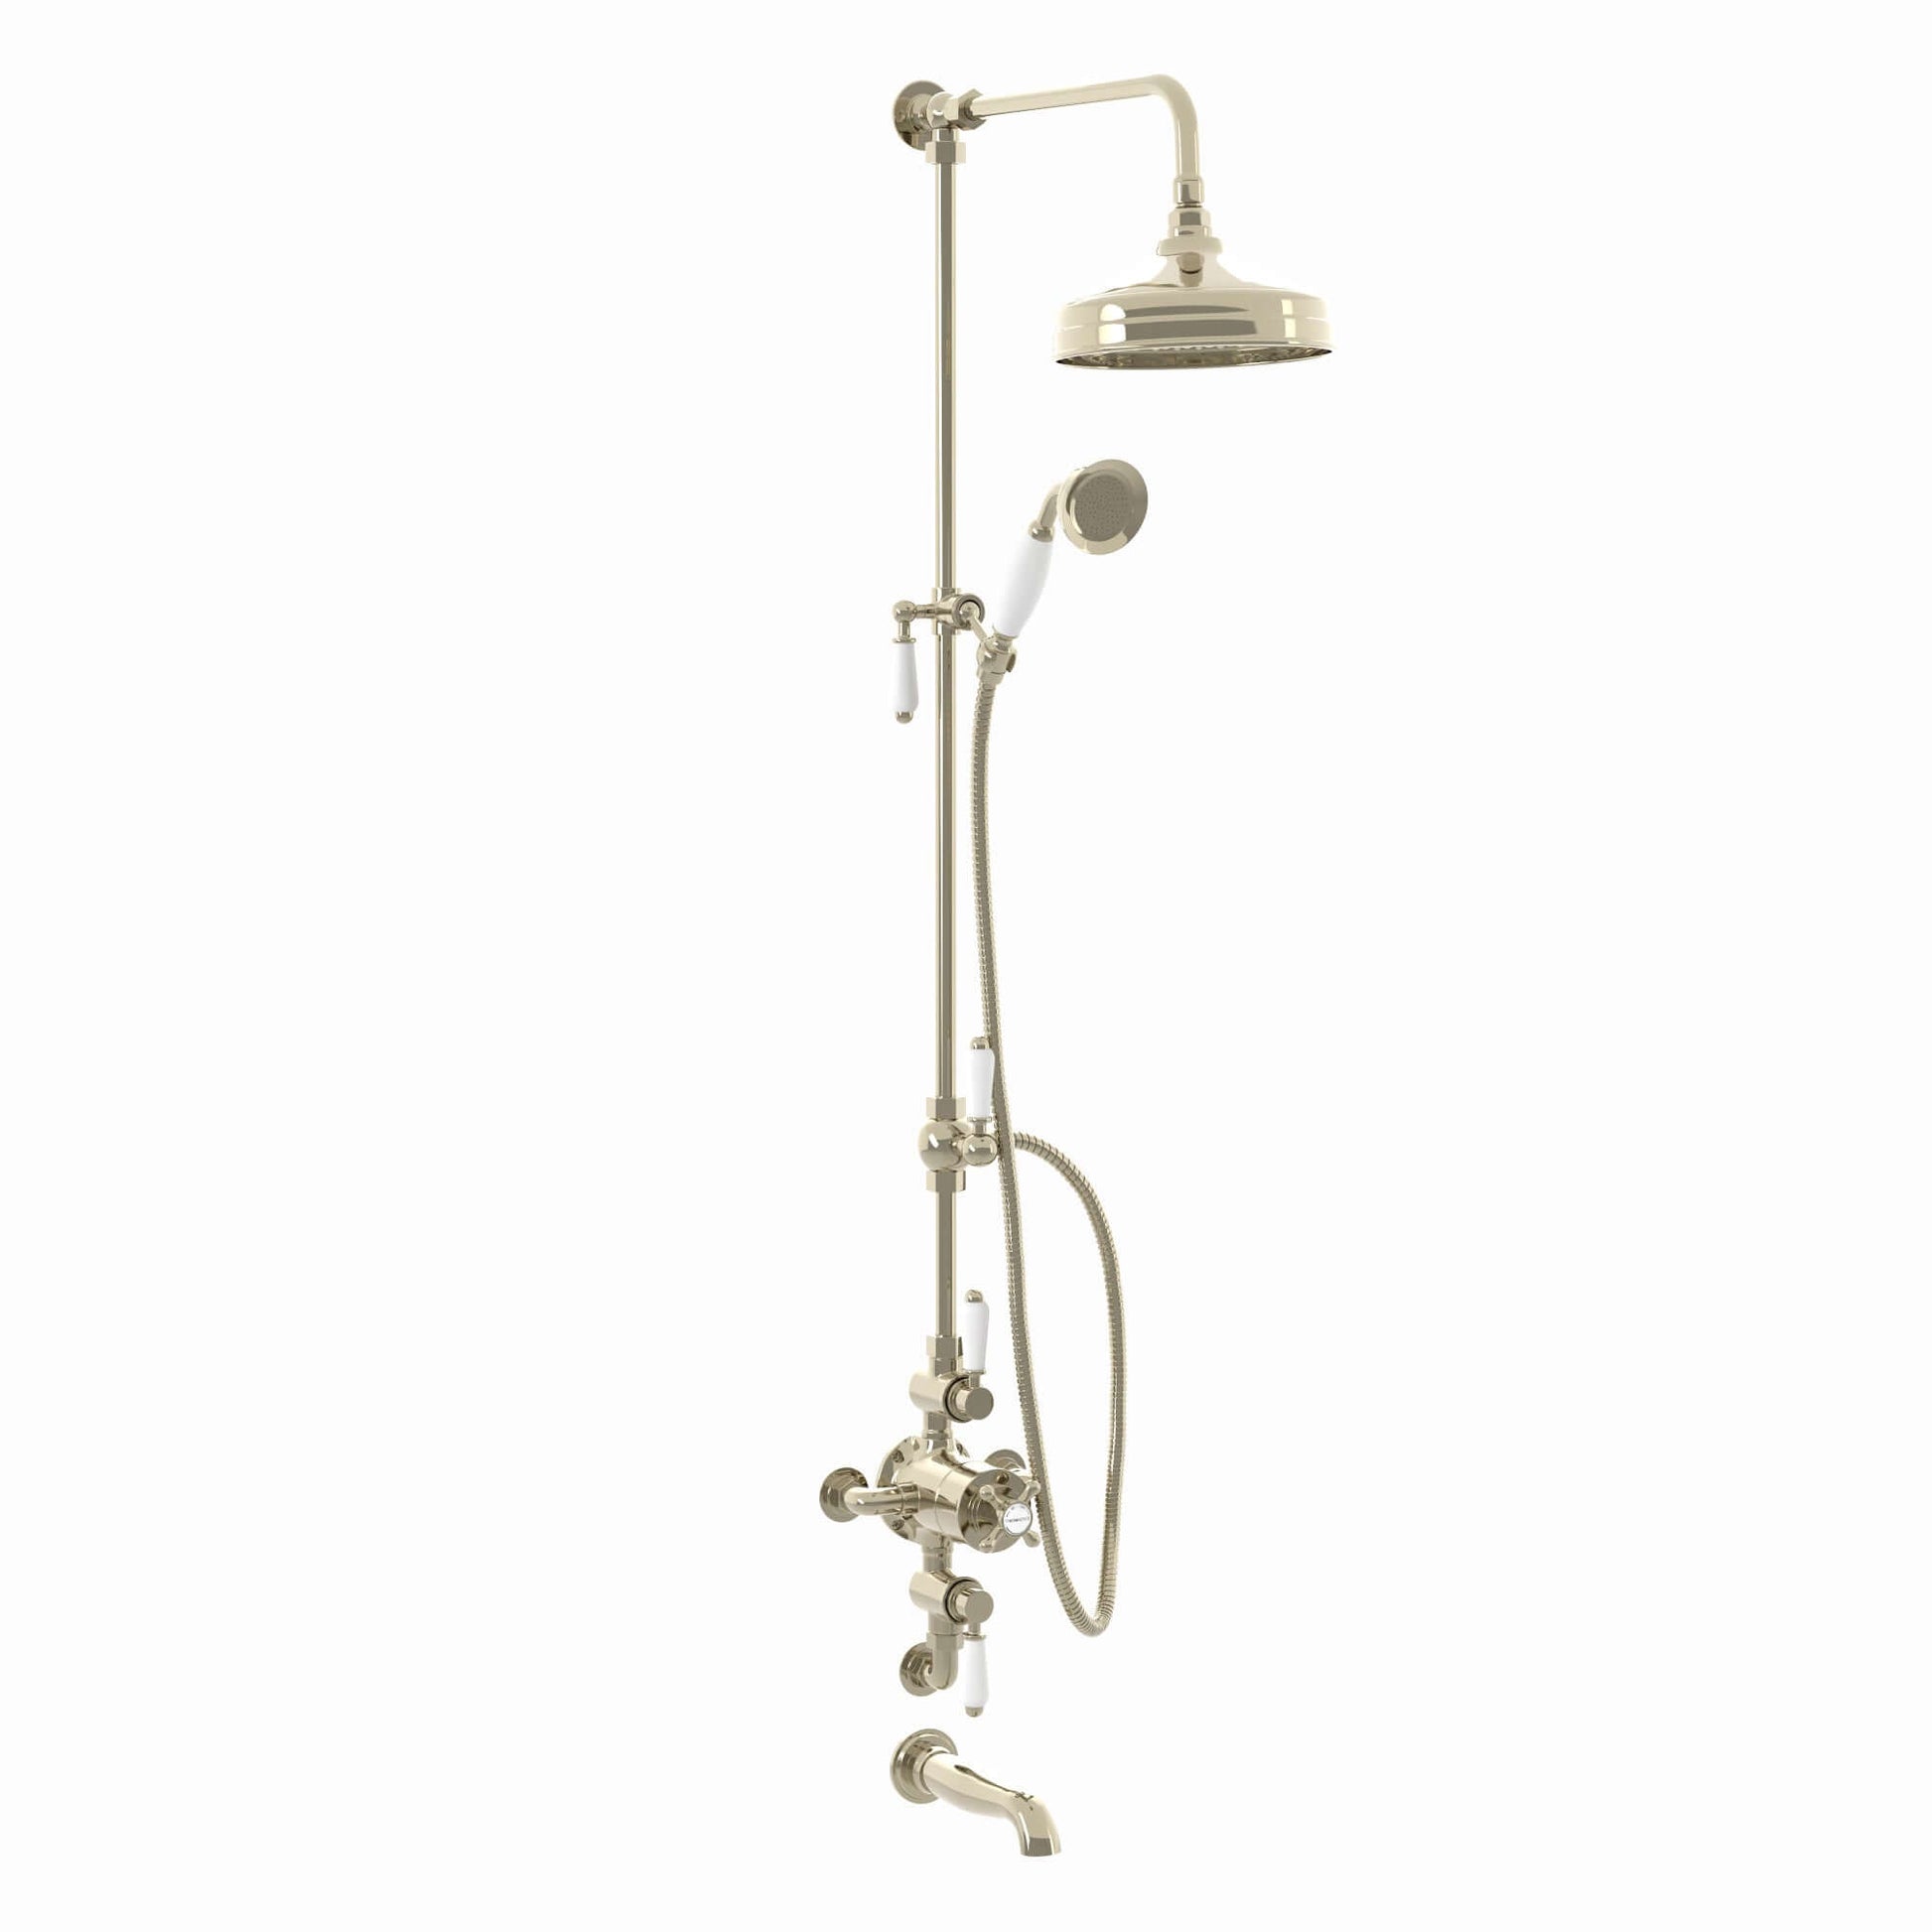 Downton Exposed Traditional Thermostatic Shower Set 3 Outlet, Incl. Triple Shower Valve, Rigid Riser Rail, 200mm Shower Head, Handset & Bath Filler - English Gold And White - Showers